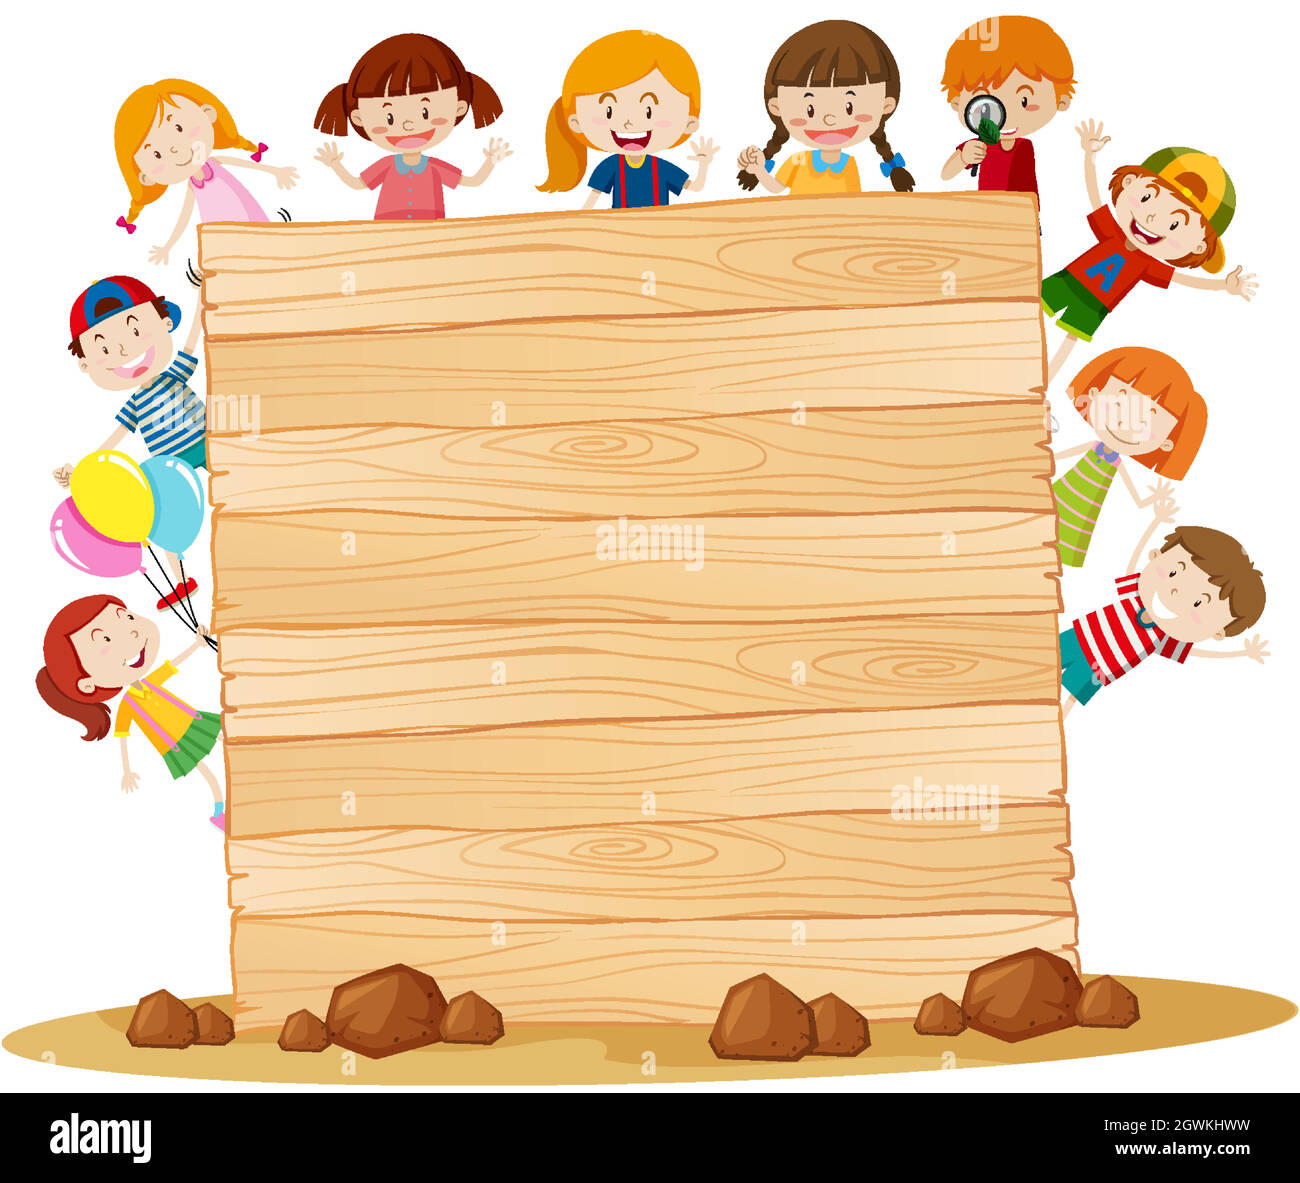 Frame template with happy kids around wooden board Stock Vector